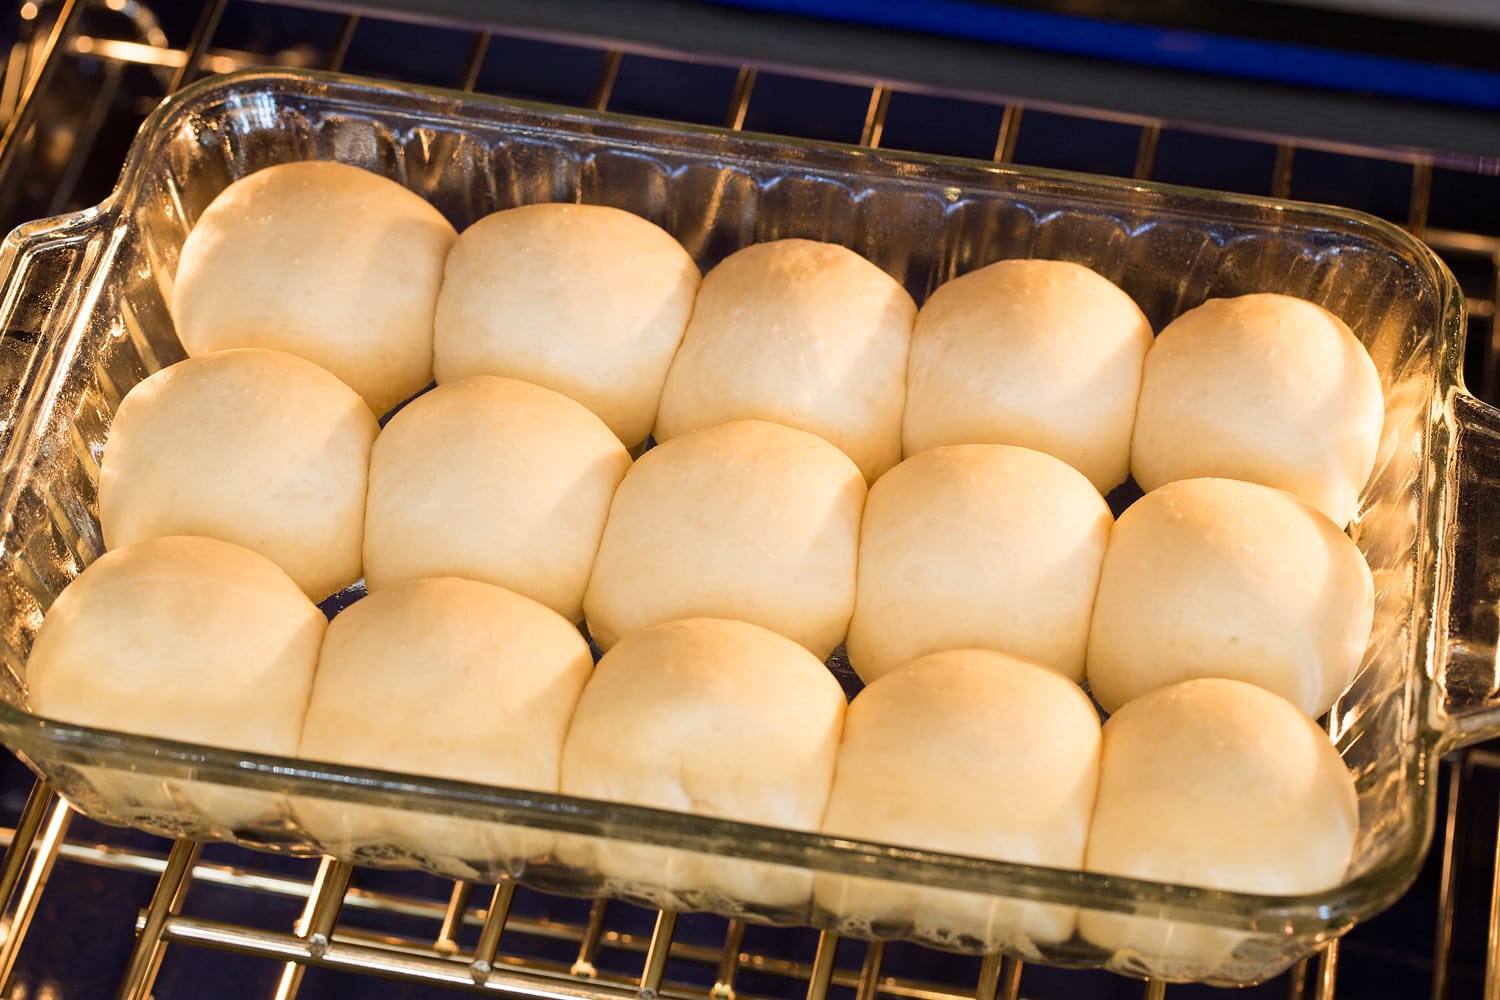 Rolls rising in oven.